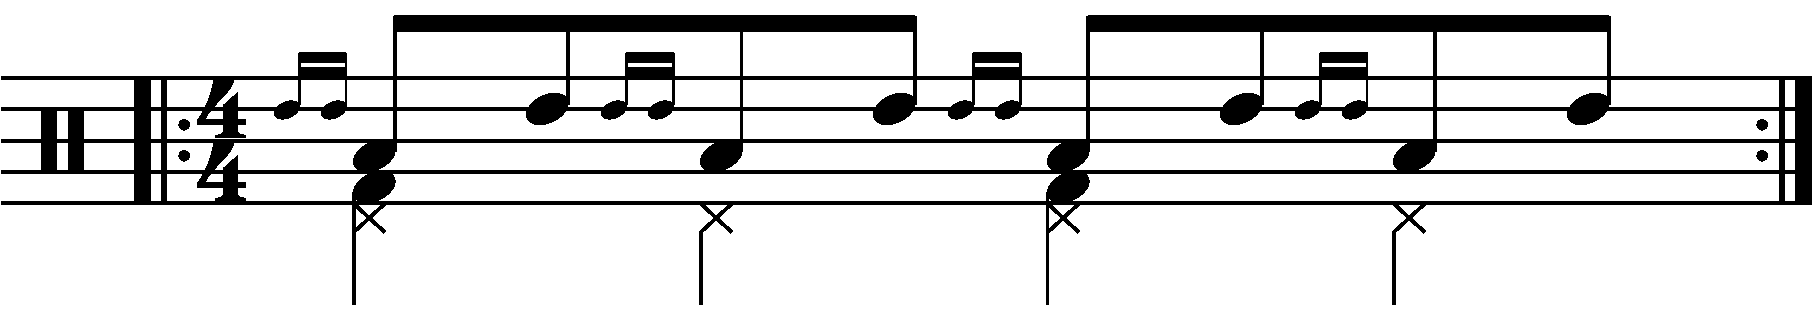 Drag tap with each hand playing a different drum